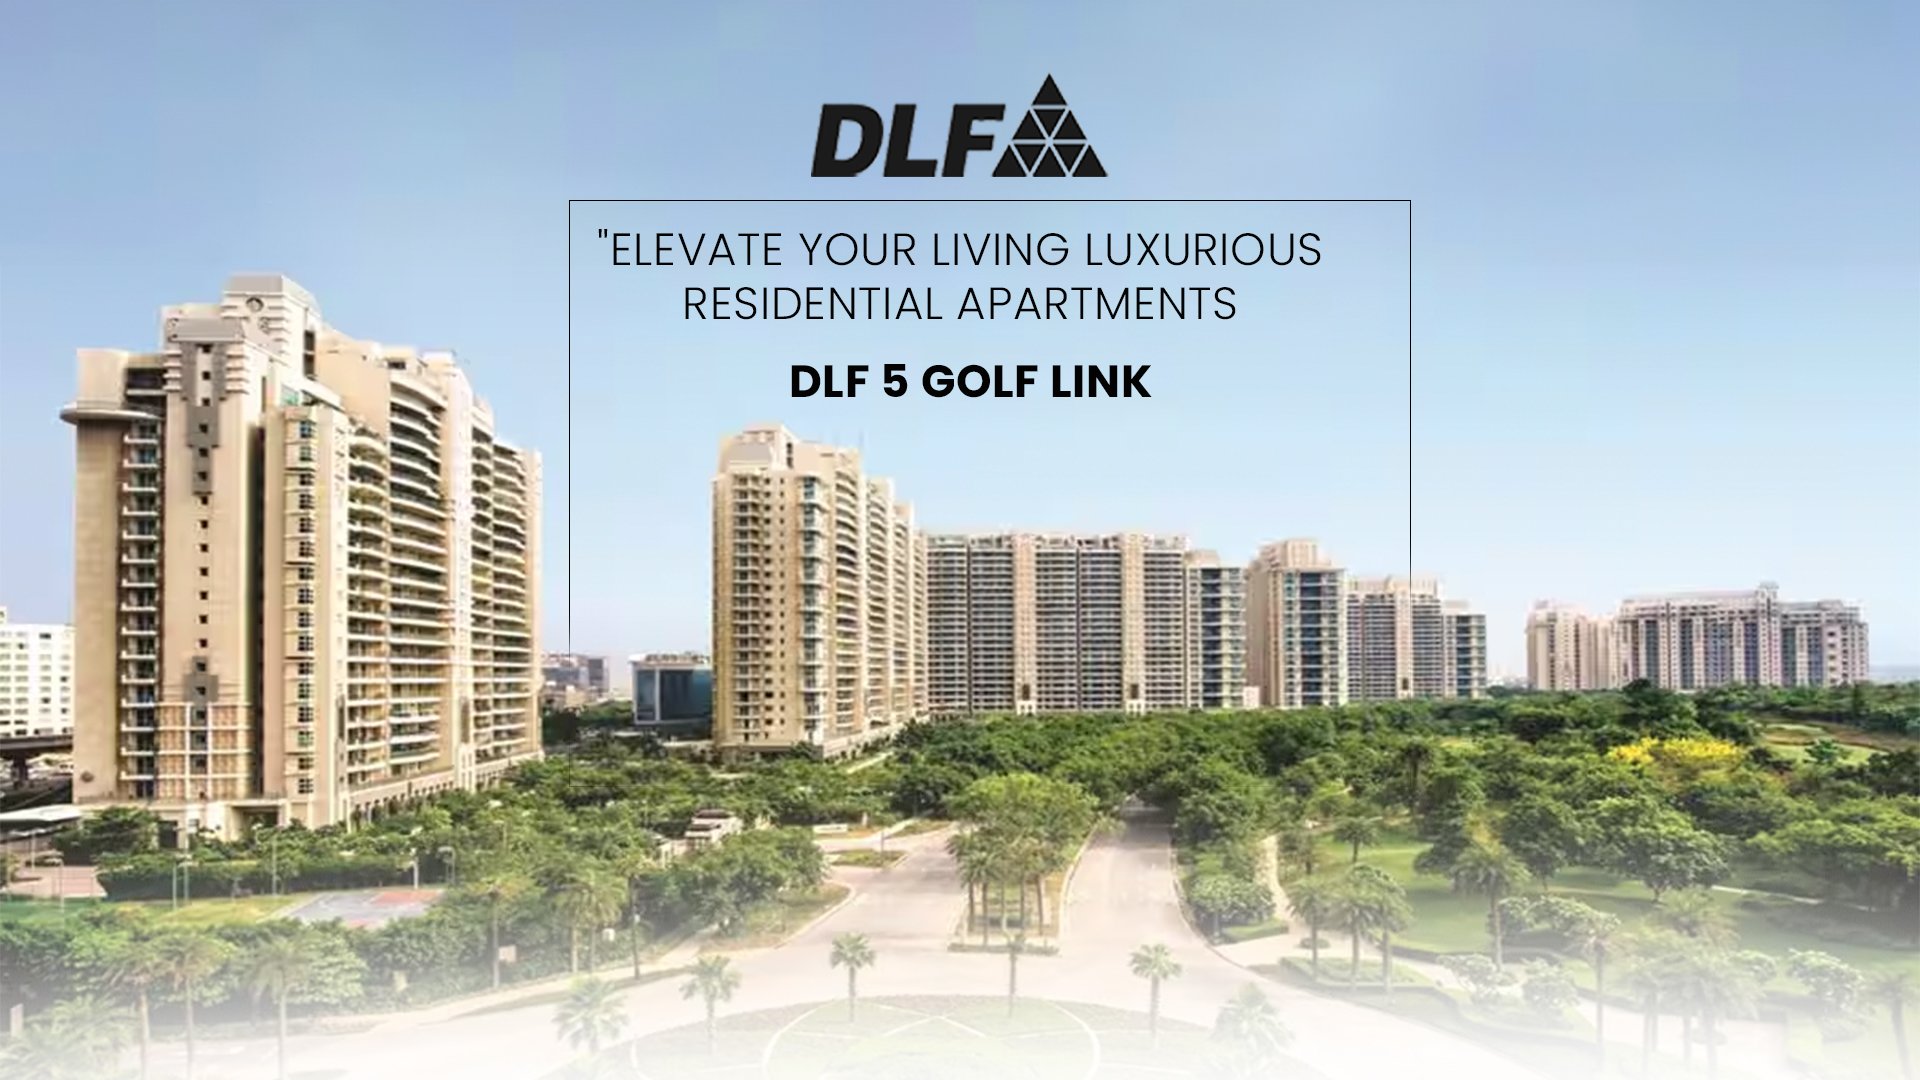 The Luxurious Lifestyle : Exploring DLF 5 Golf Link Residences